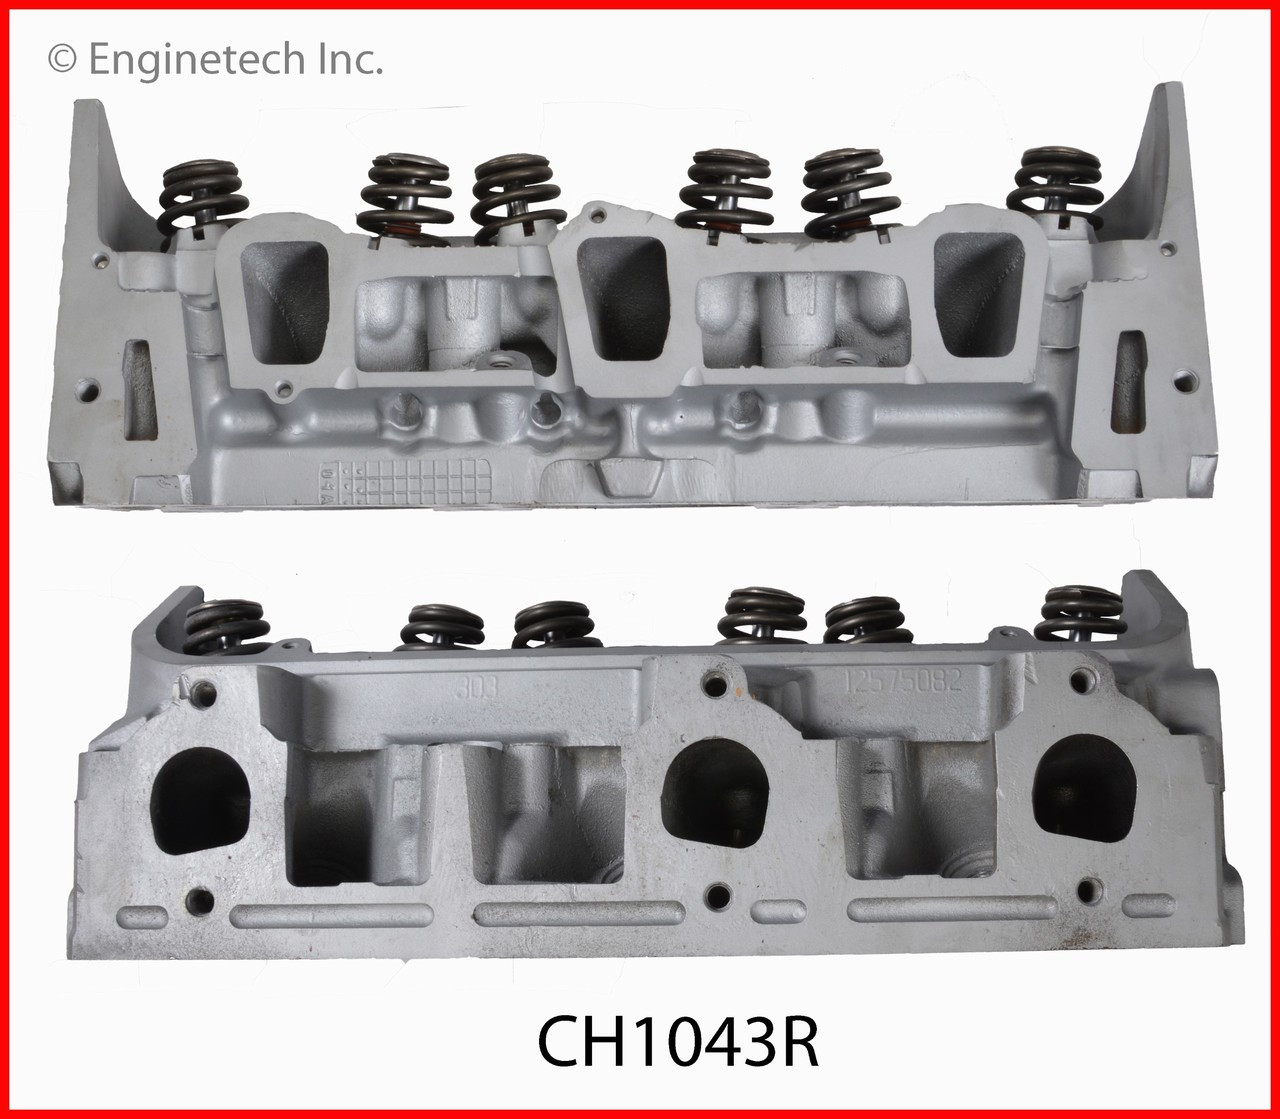 2006 Chevrolet Equinox 3.4L Engine Cylinder Head Assembly CH1043R -6